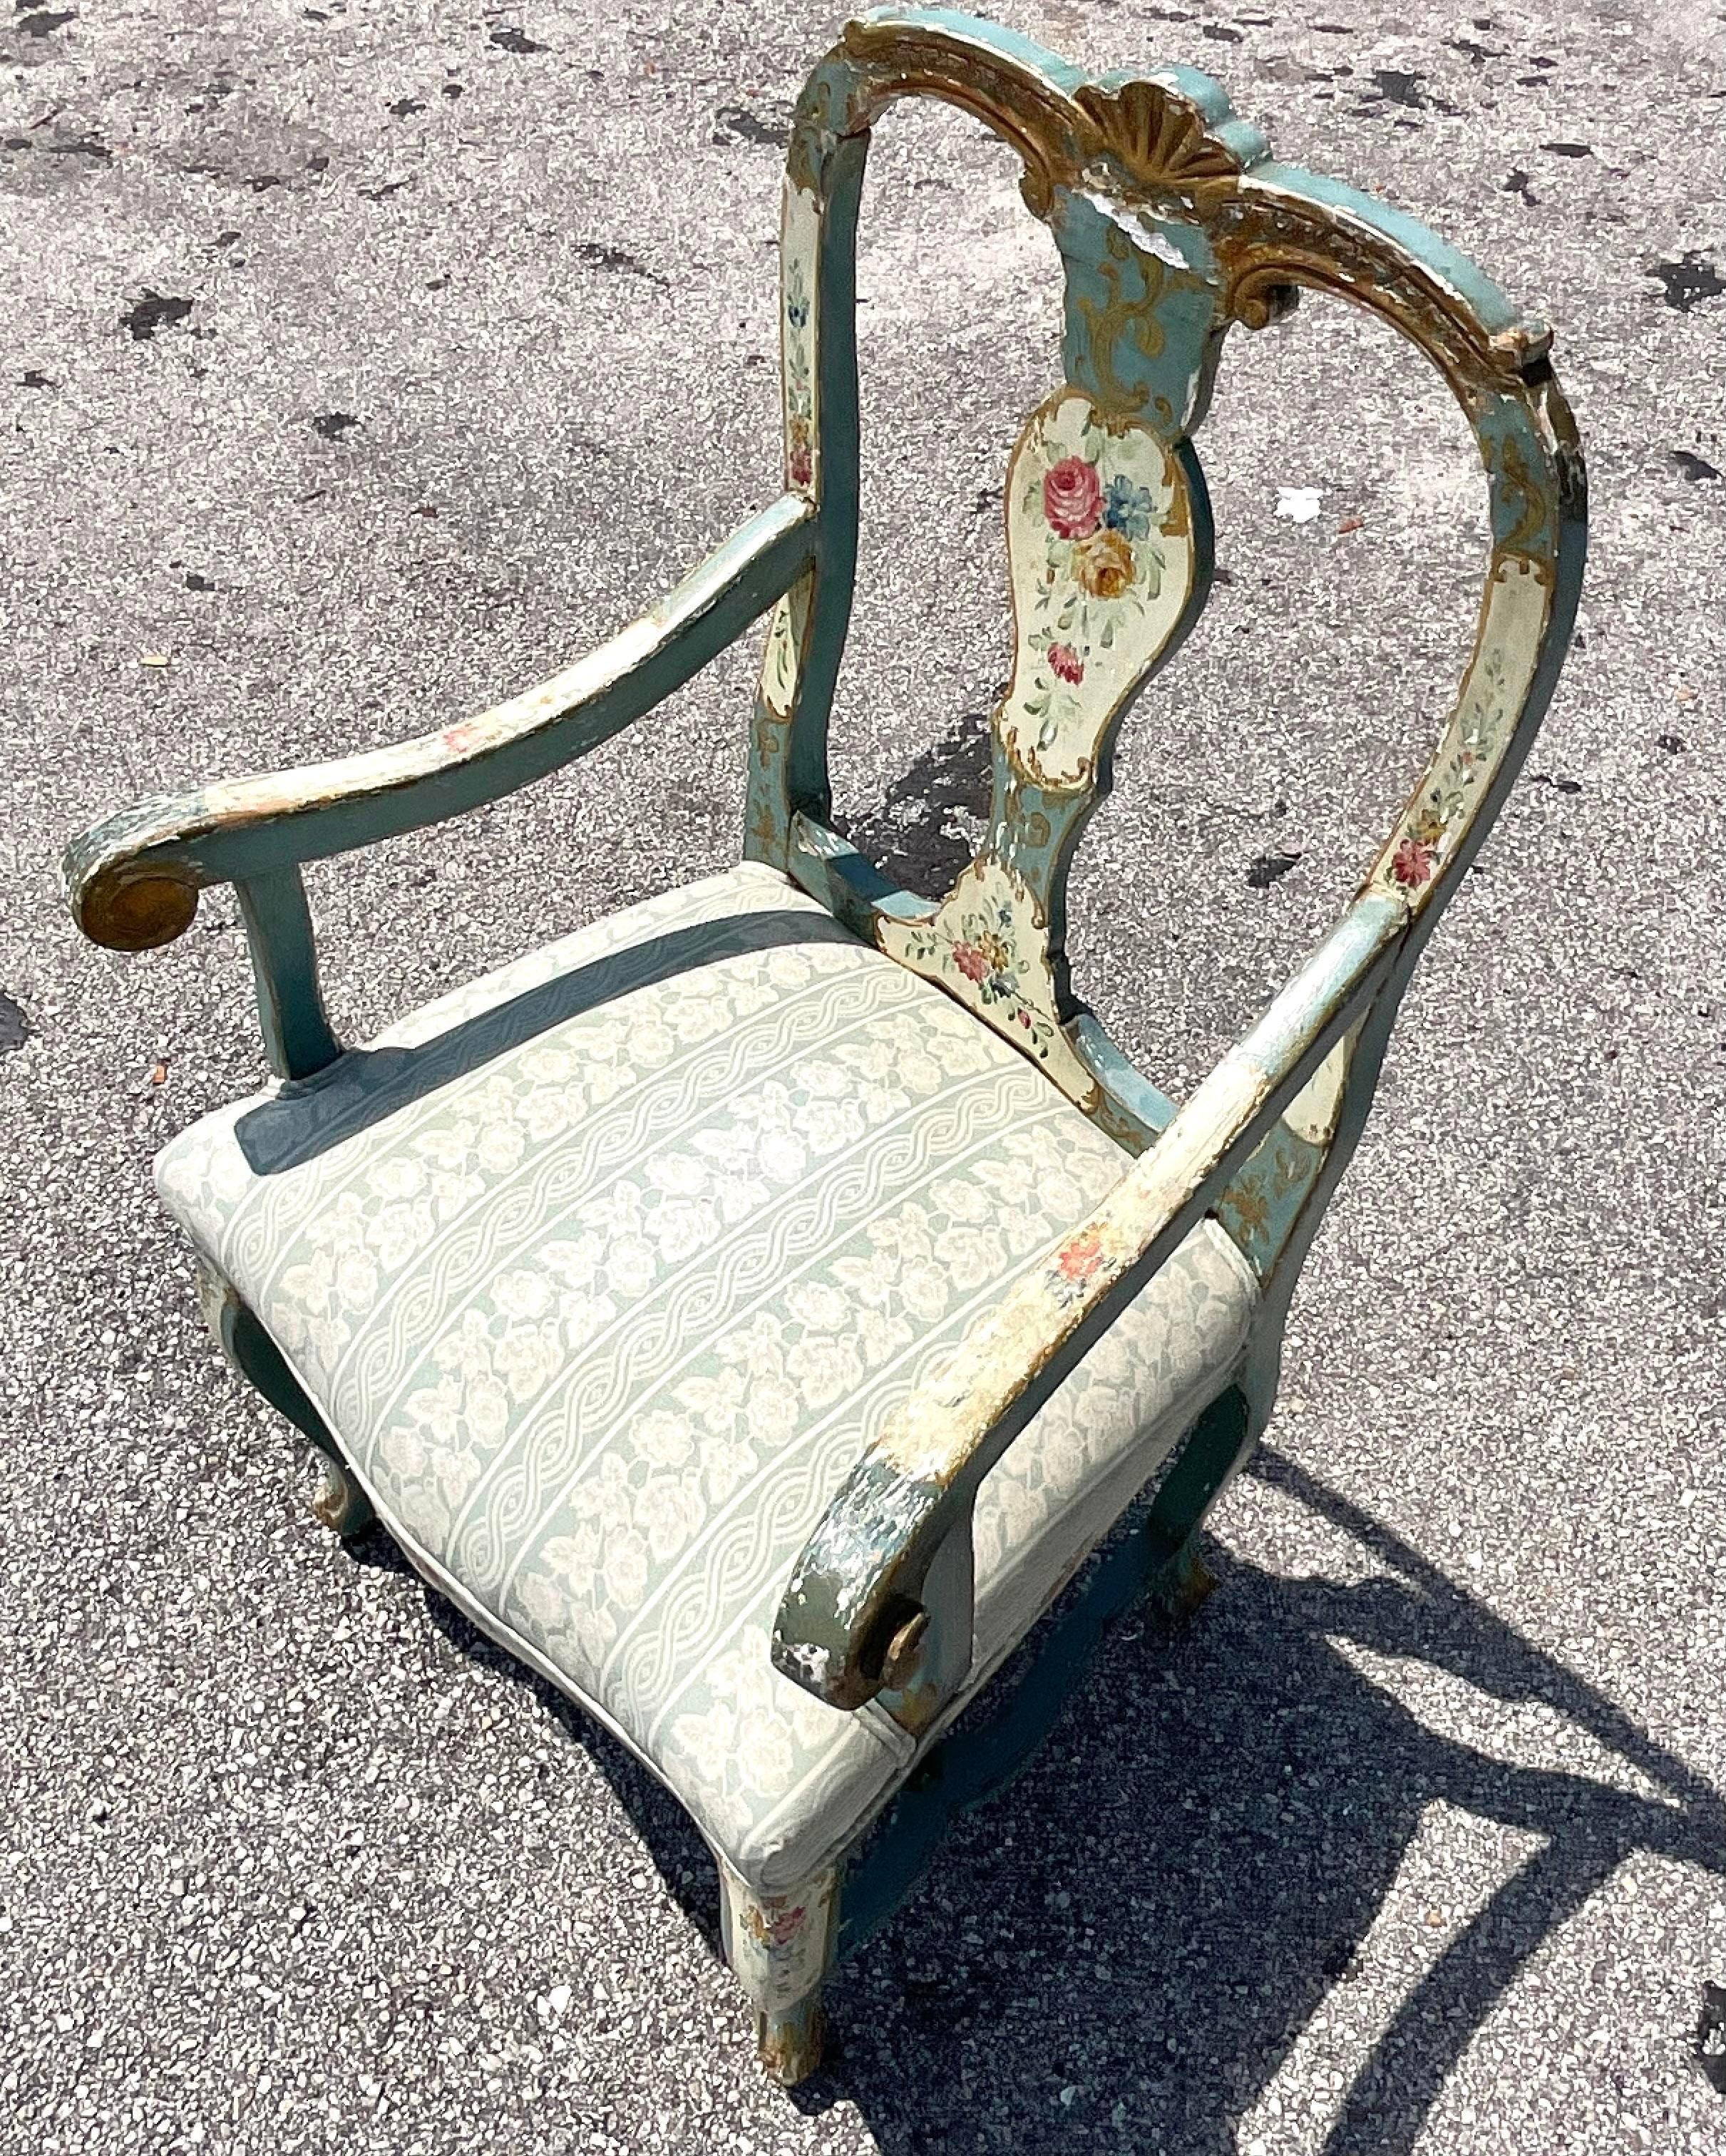 A fabulous vintage Boho arm chair. A chic Italian hand painted floral design. An all over patina from time that gives it a romantic look. Coordinating pieces also available on my Chairish page. Acquired from a Palm Beach estate.